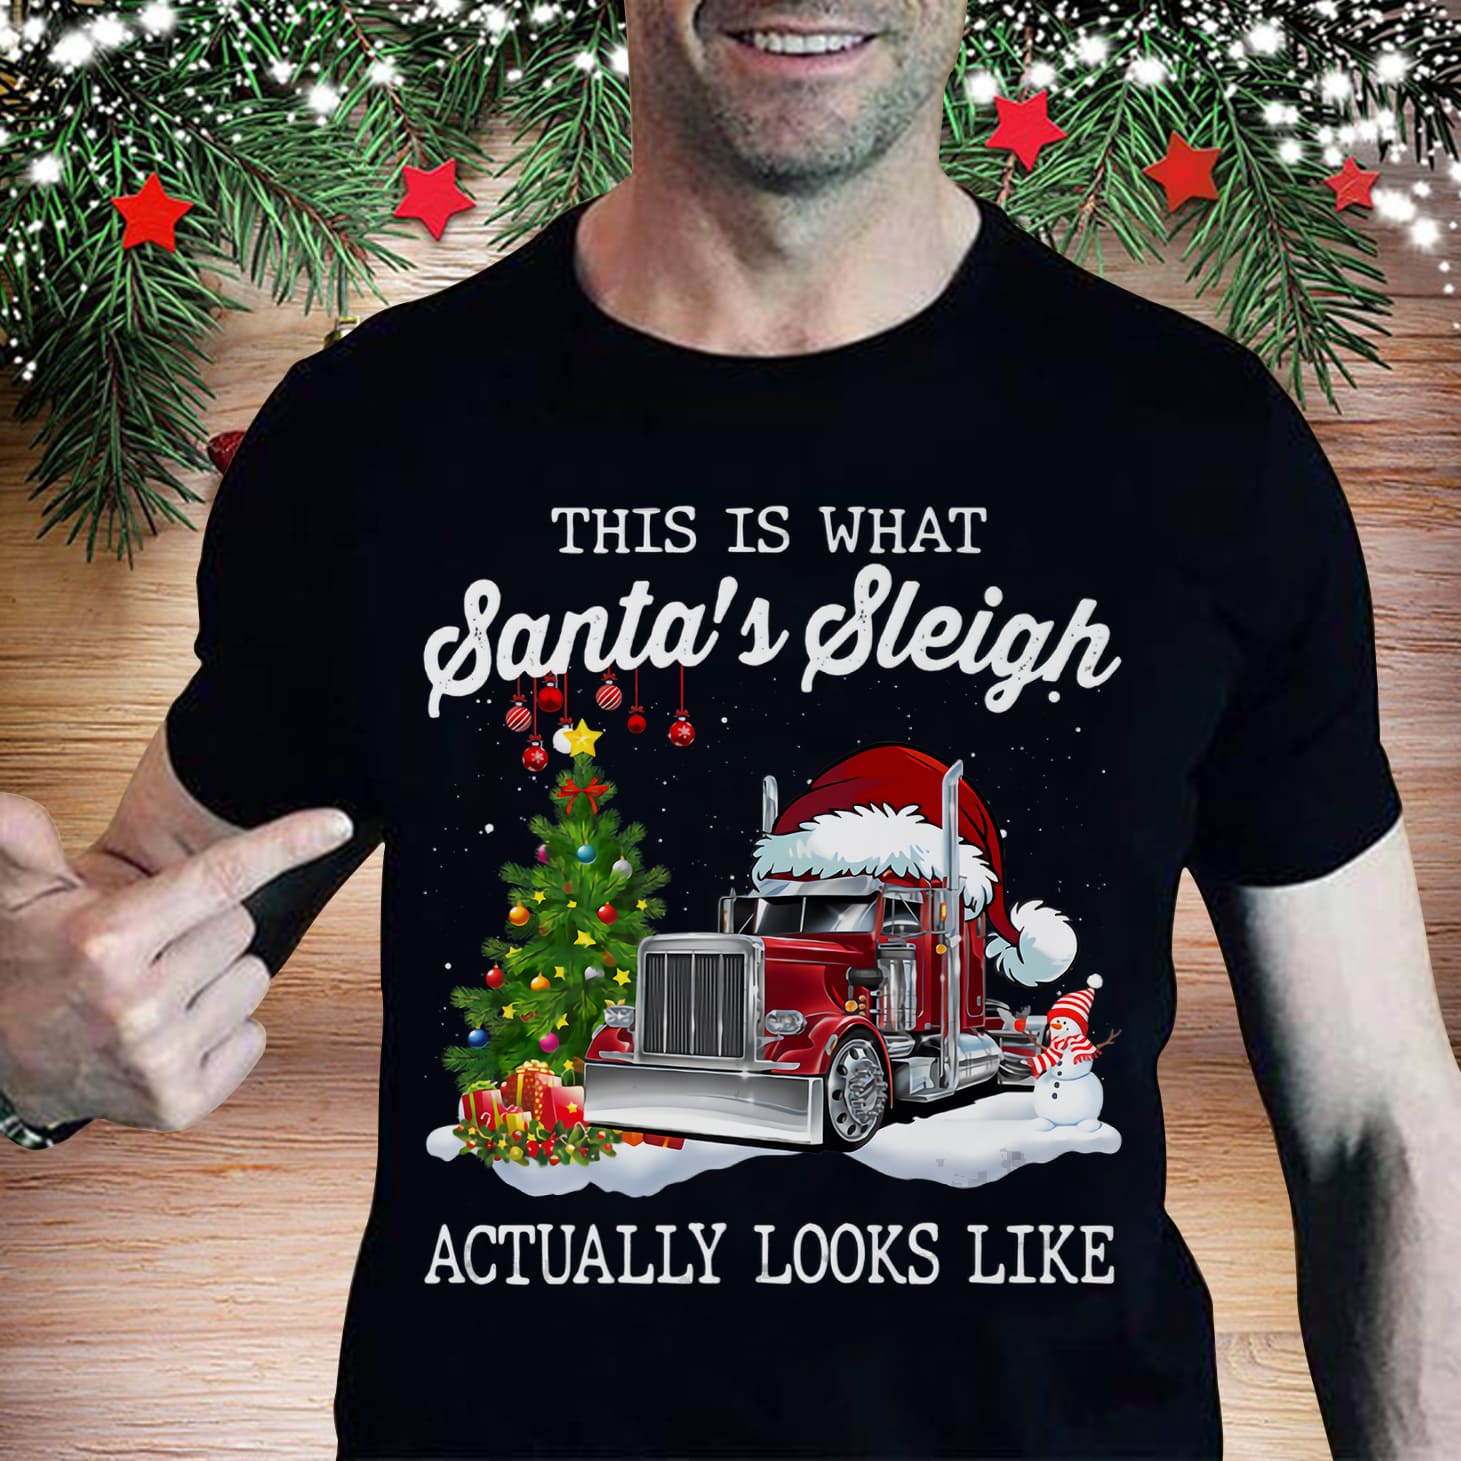 Santa Trucker Truck Graphic T-shirt - This is what santa's sleigh actually looks like